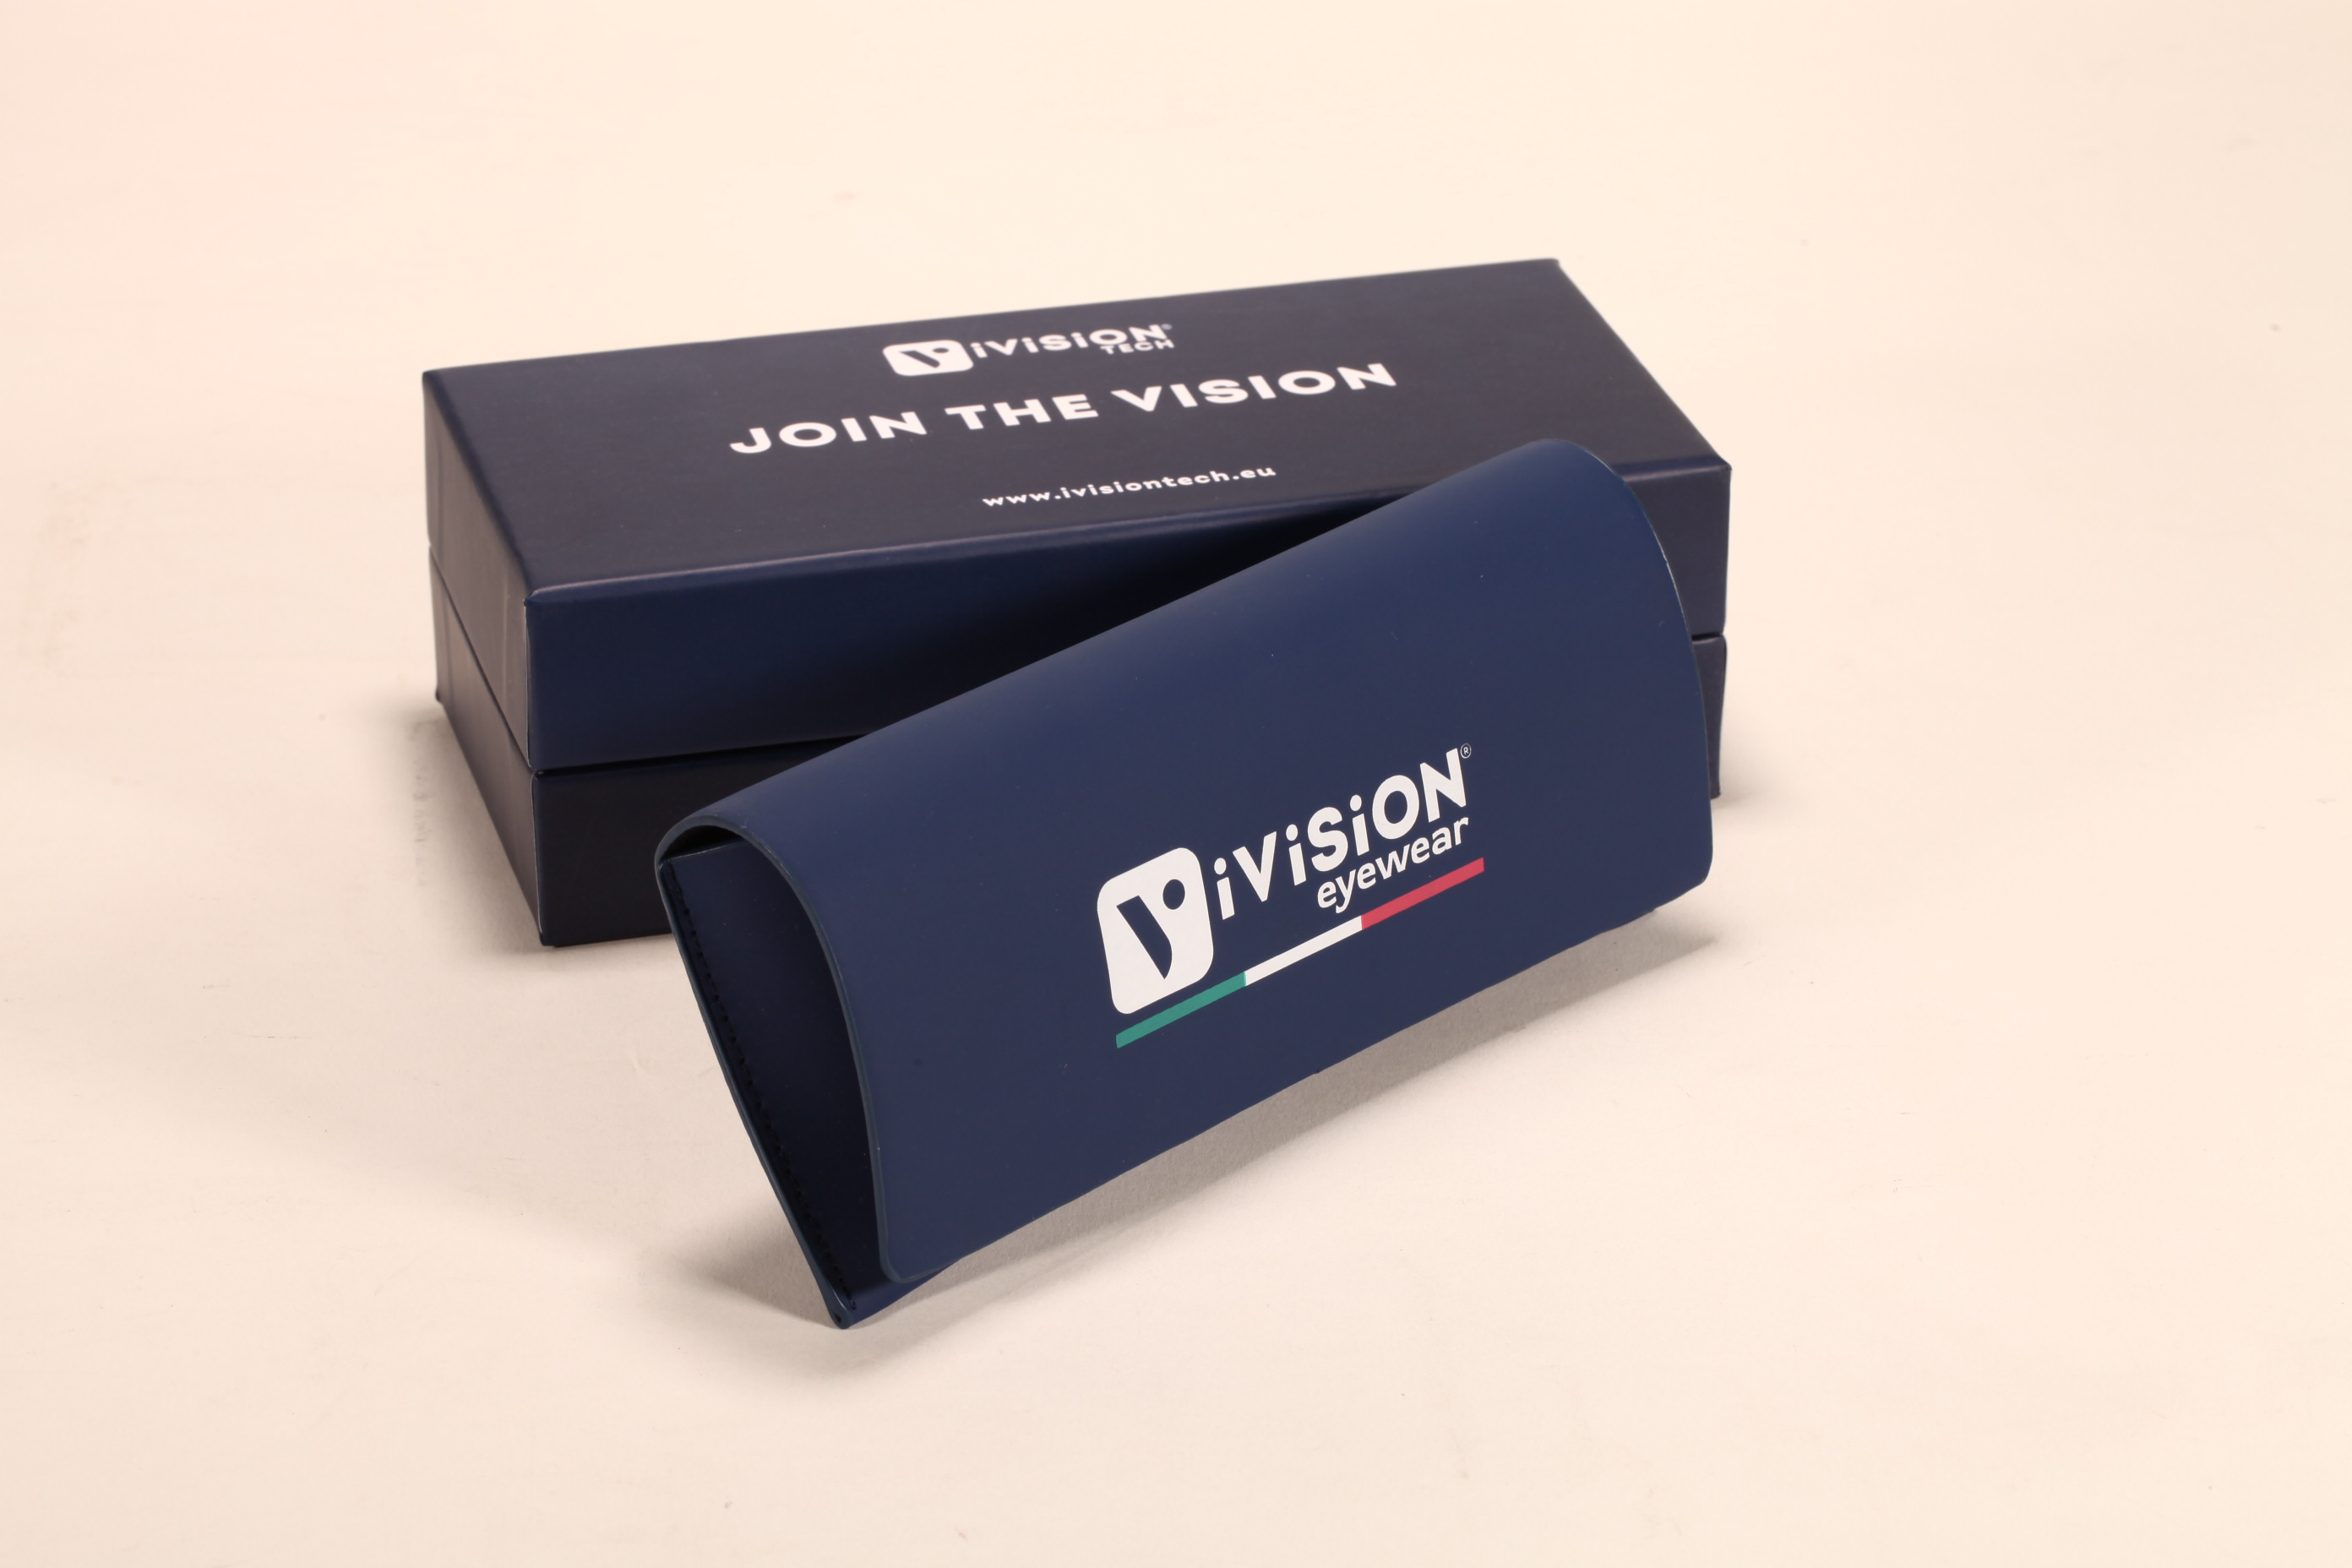 A glasses case set, which includes a cardboard box and a glasses case soft bag, printed with the brand LOGO, you can also customize the LOGO and pattern